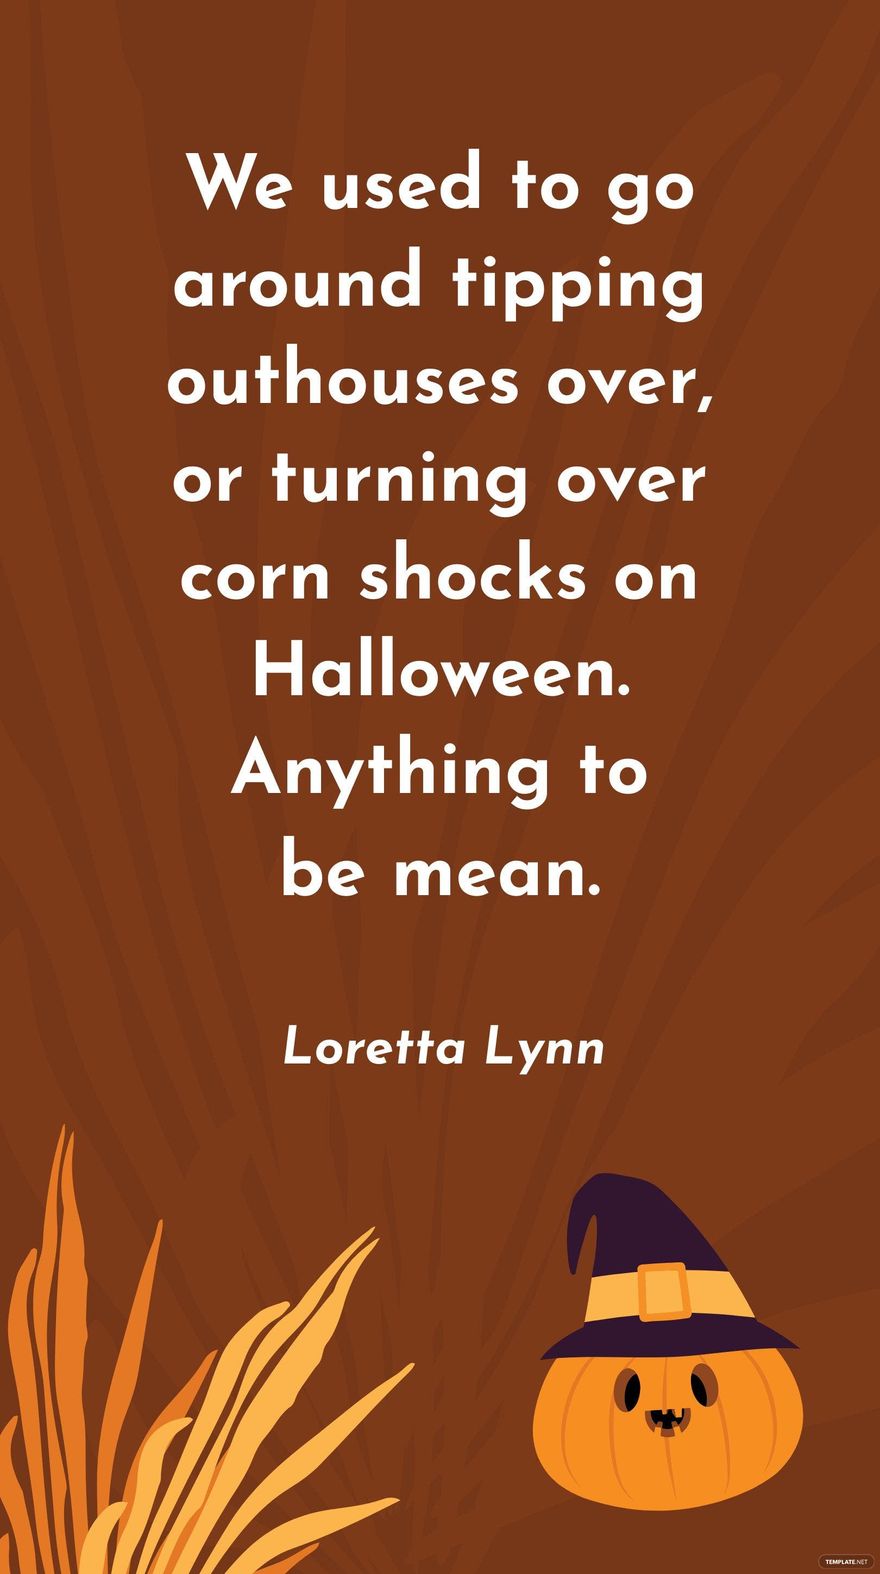 Free Loretta Lynn - We used to go around tipping outhouses over, or turning over corn shocks on Halloween. Anything to be mean.